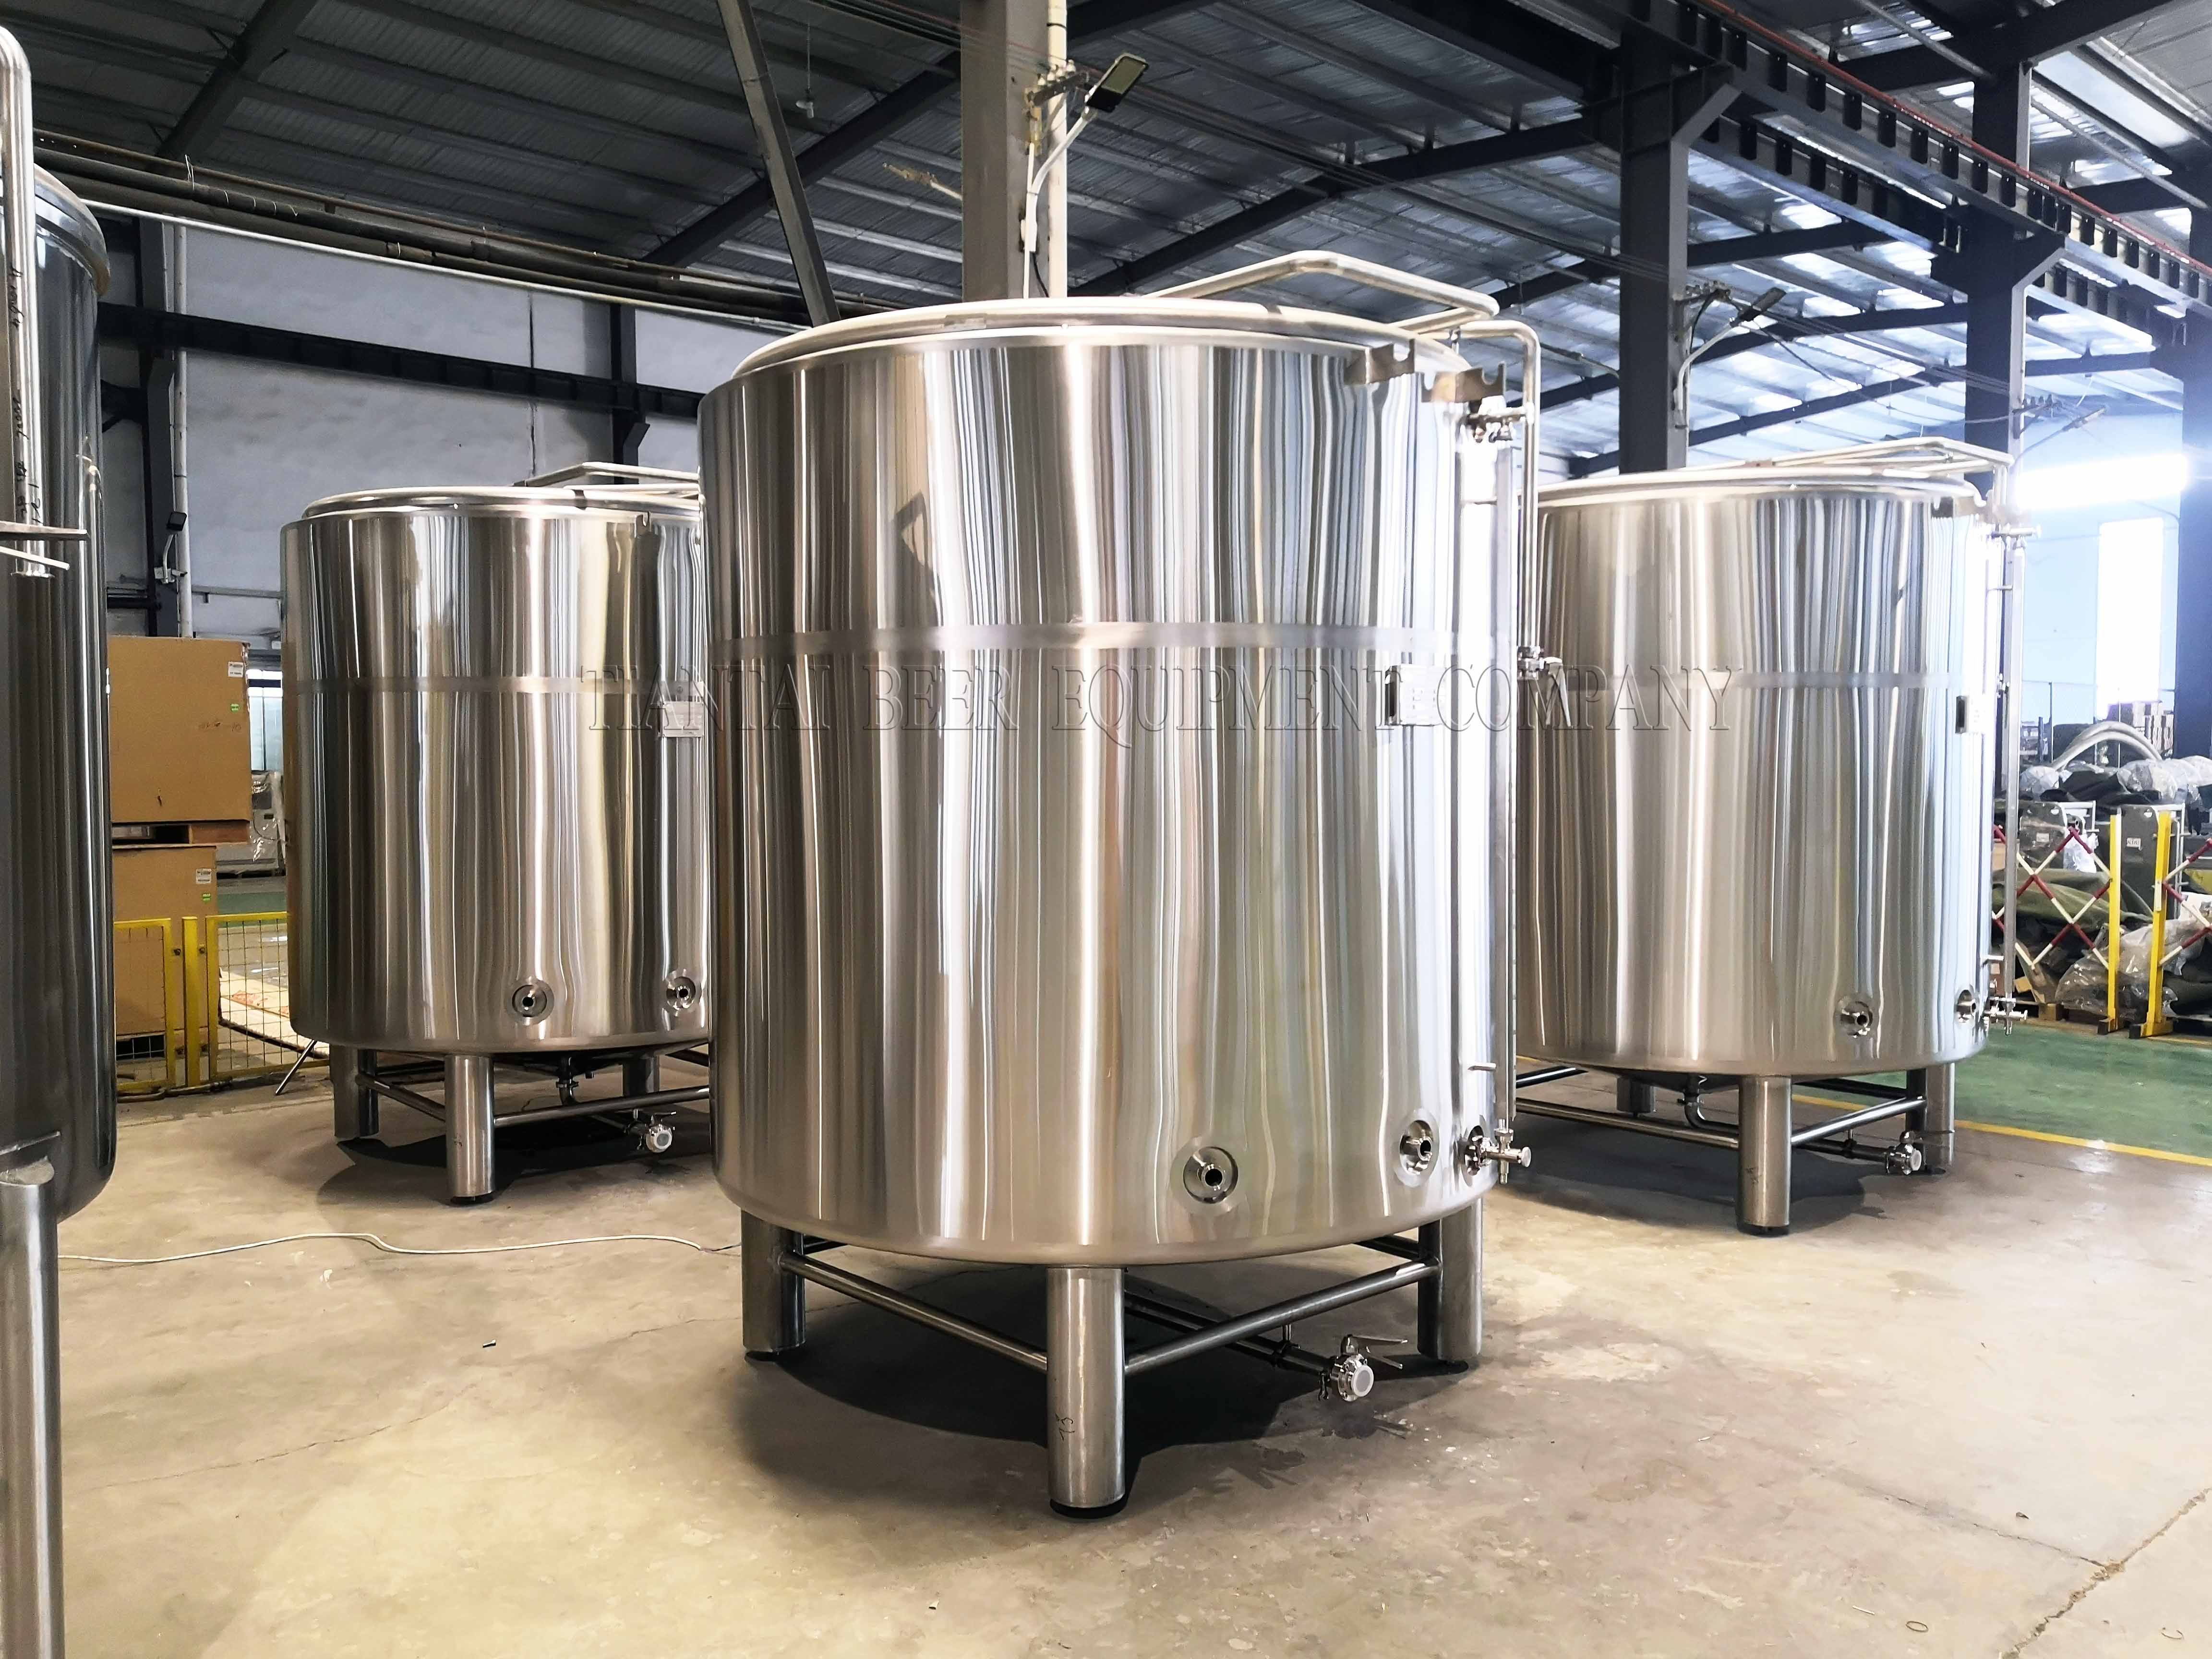 Completely 4000l Kombucha brewing project made by Tiantai